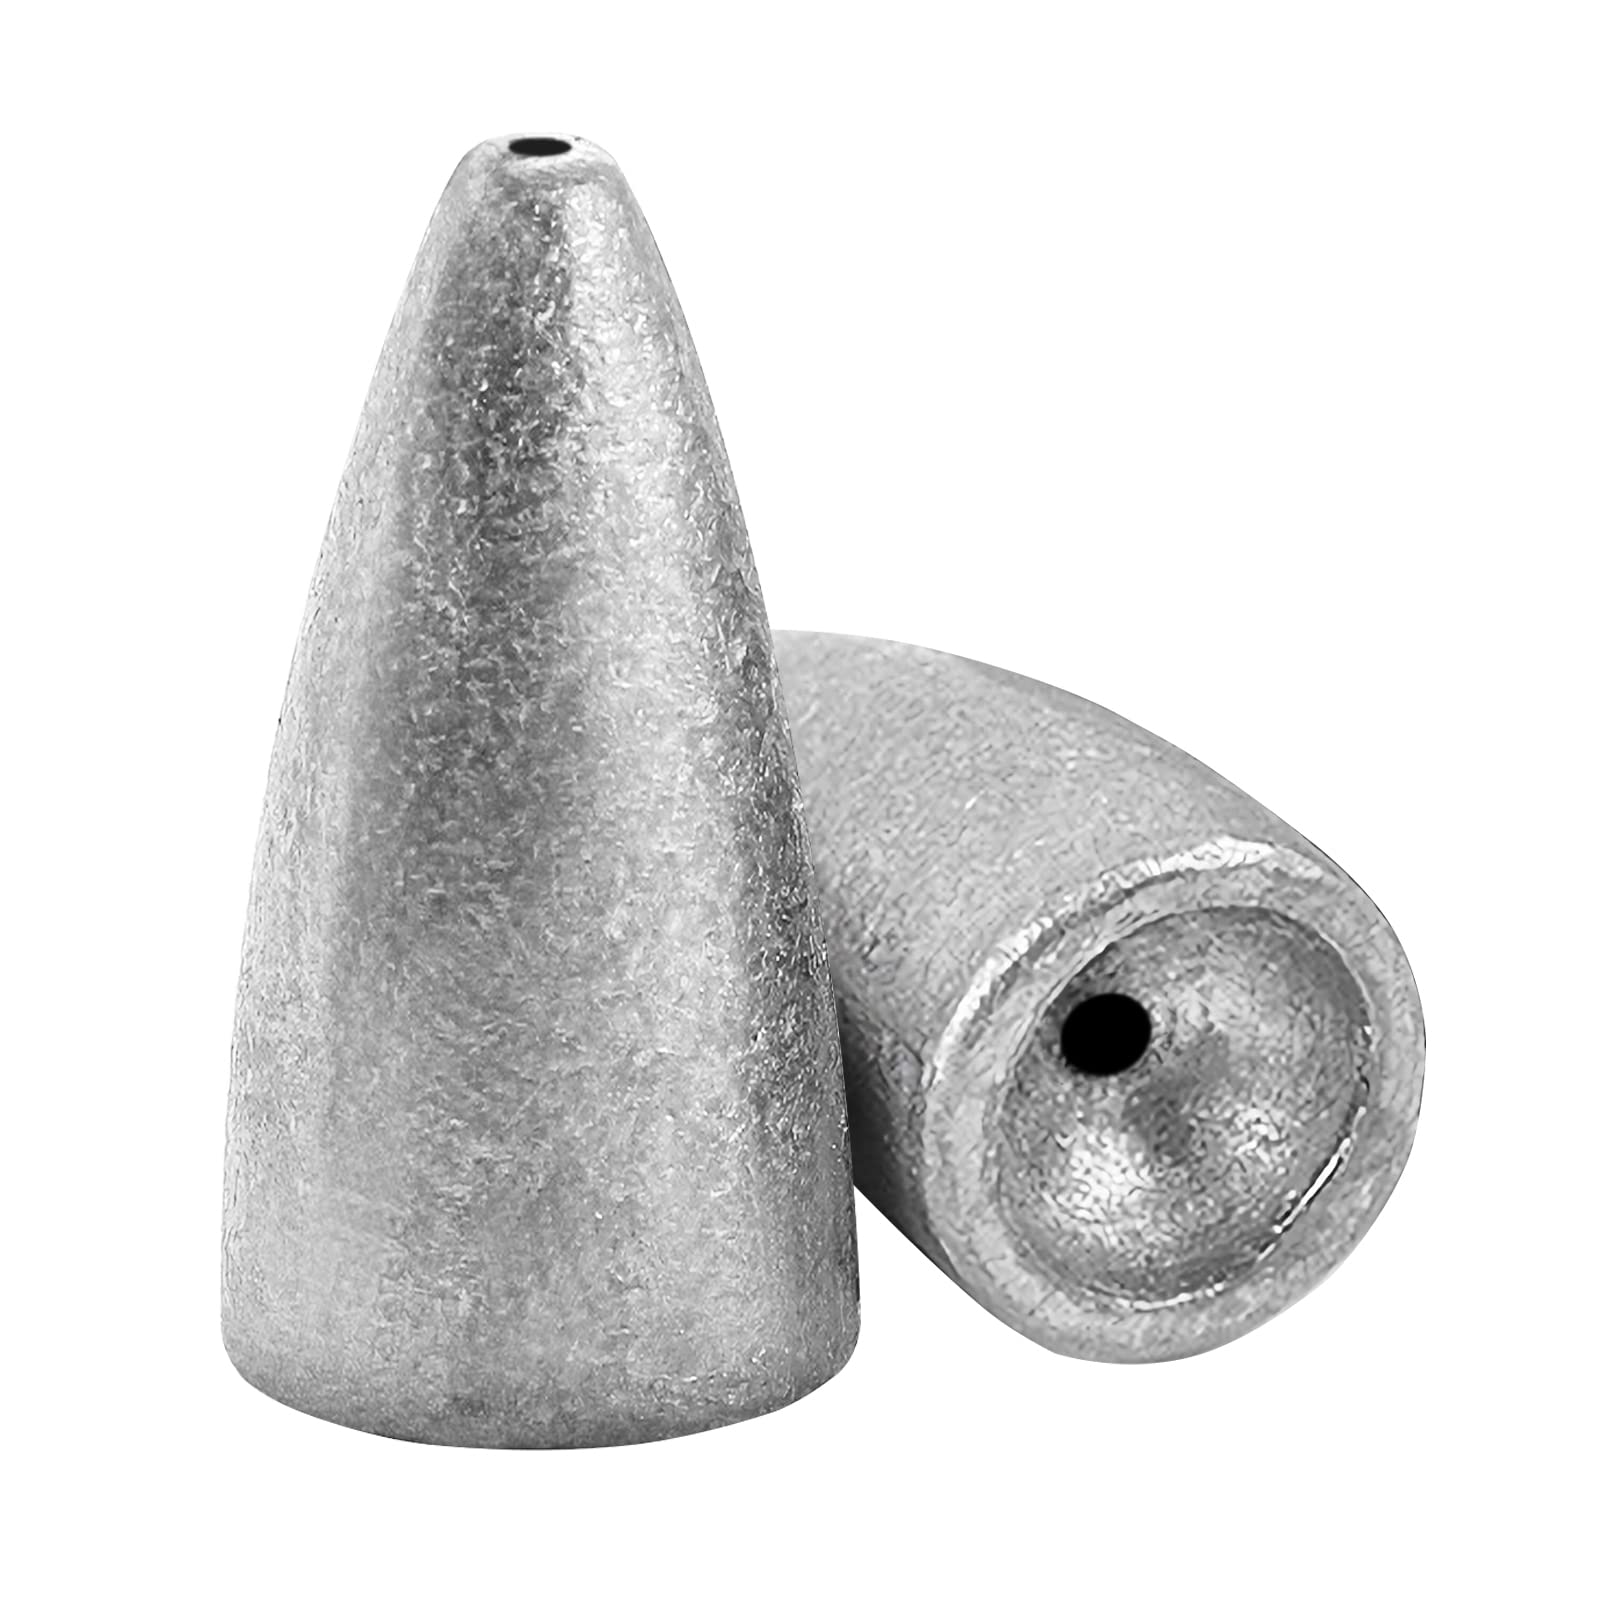 AMYSPORTS Bullet Drop Weights Sinkers Kit Saltwater Removable